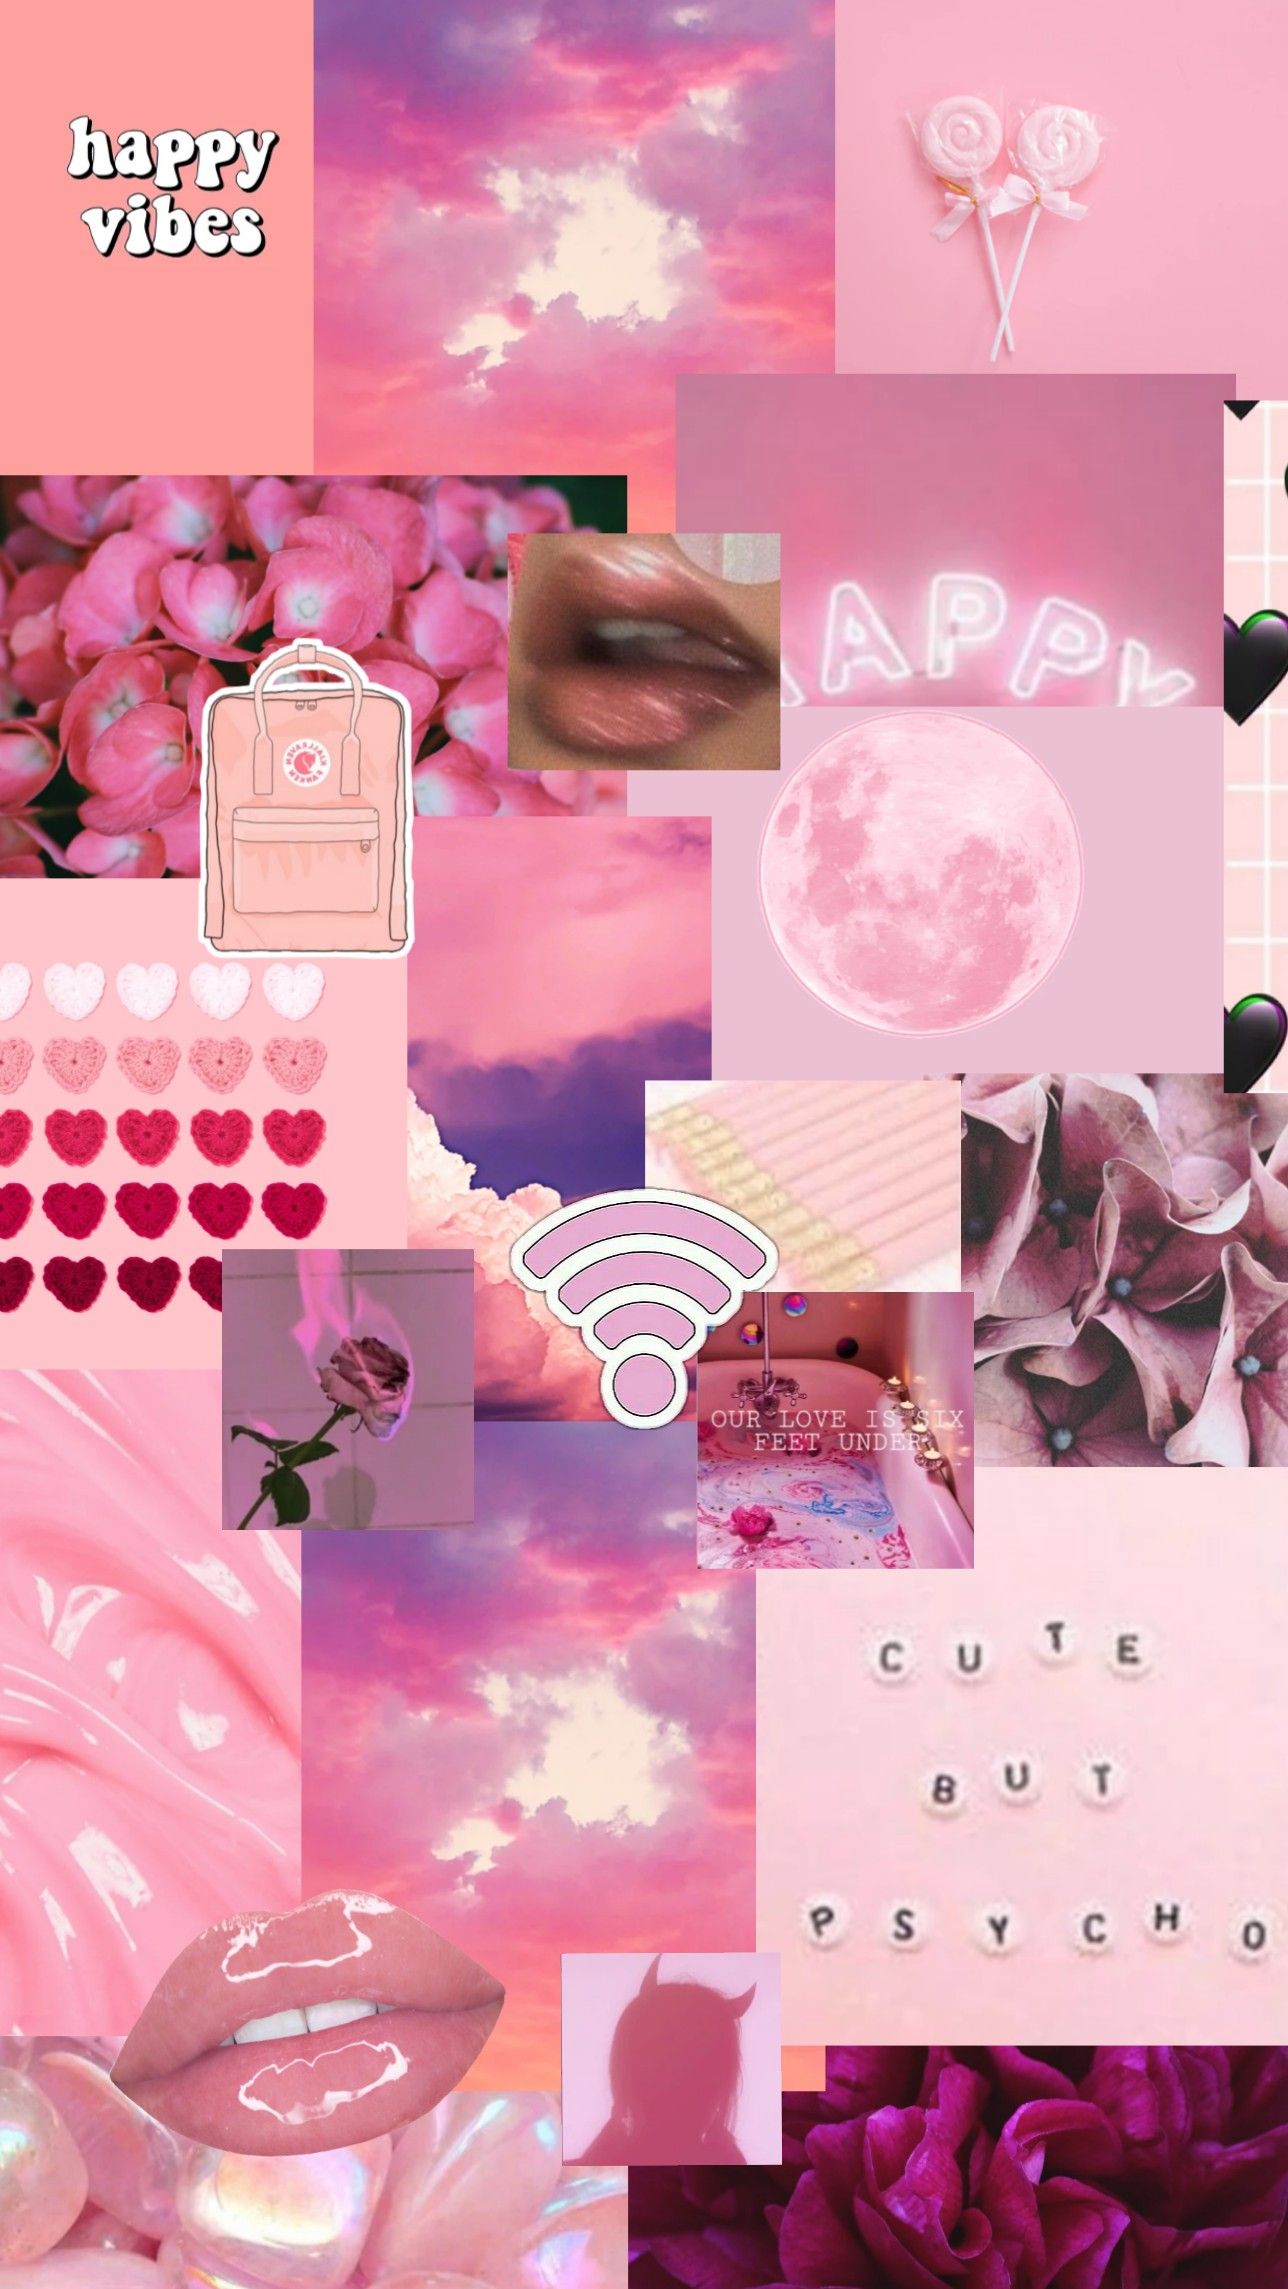 Aesthetic Pink Collage Wallpaper. Pink wallpaper iphone, Aesthetic iphone wallpaper, iPhone wallpaper tumblr aesthetic